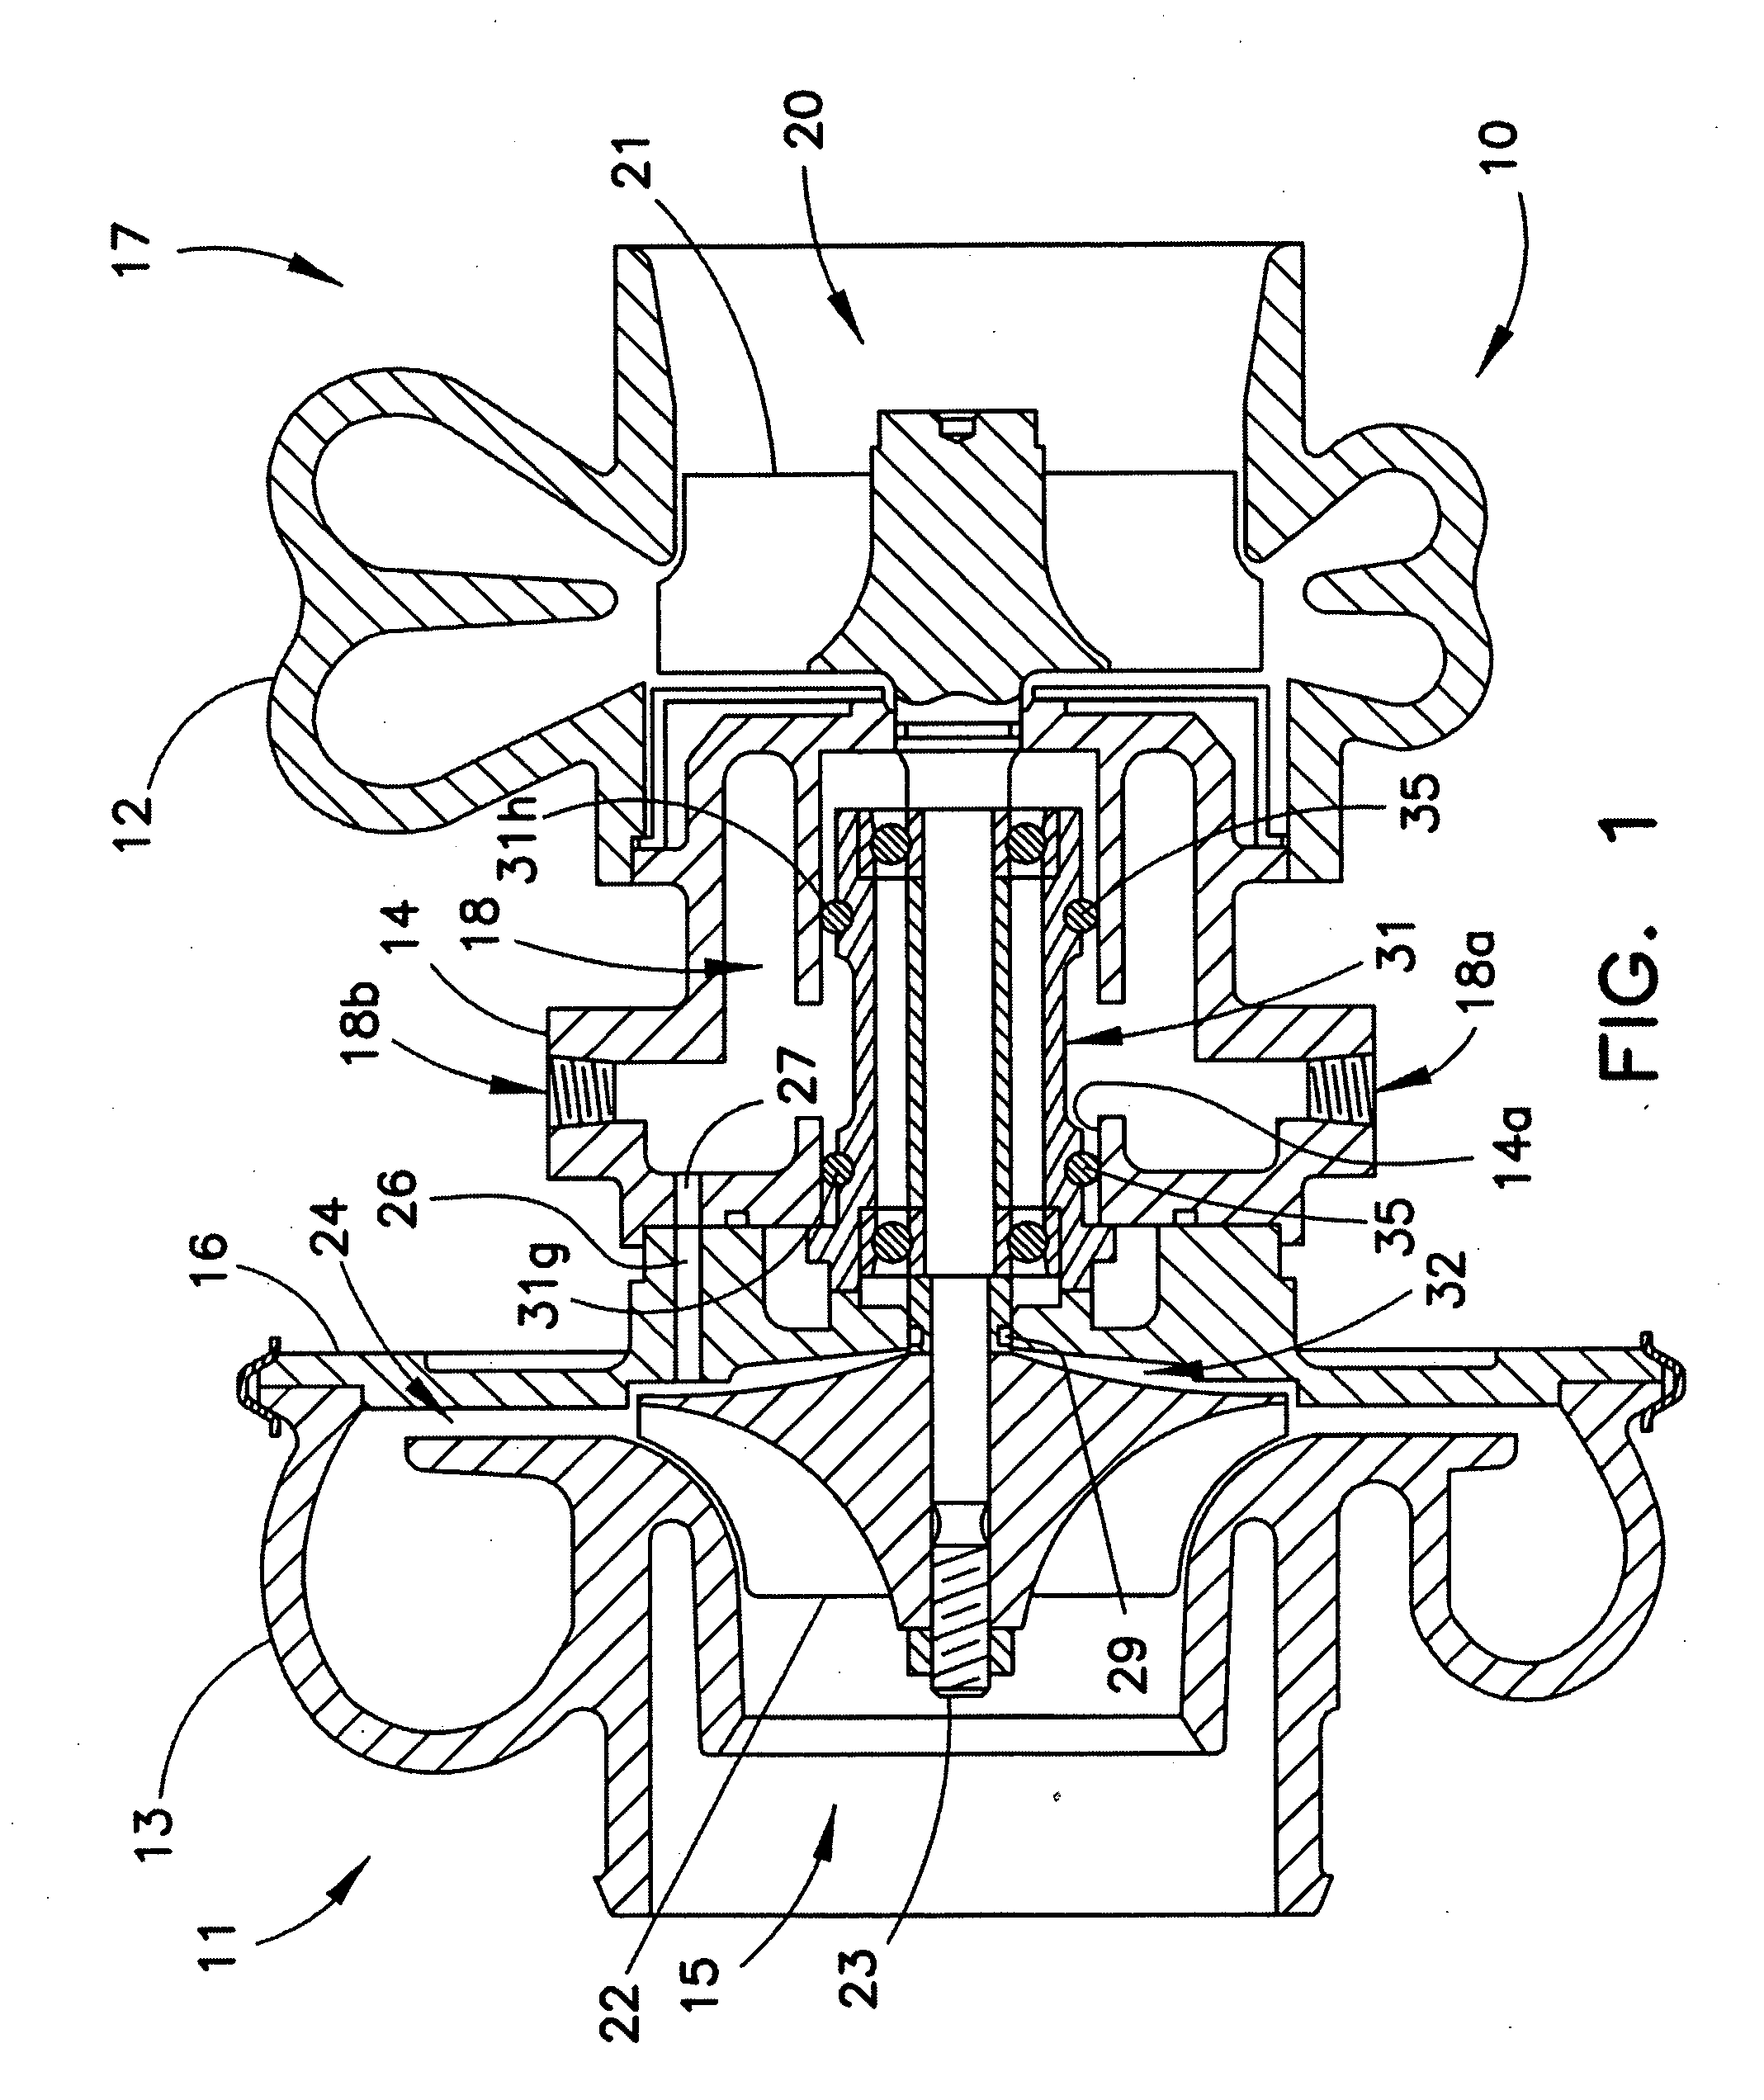 Air-cooled turbocharger with optional internal pressure relief valve